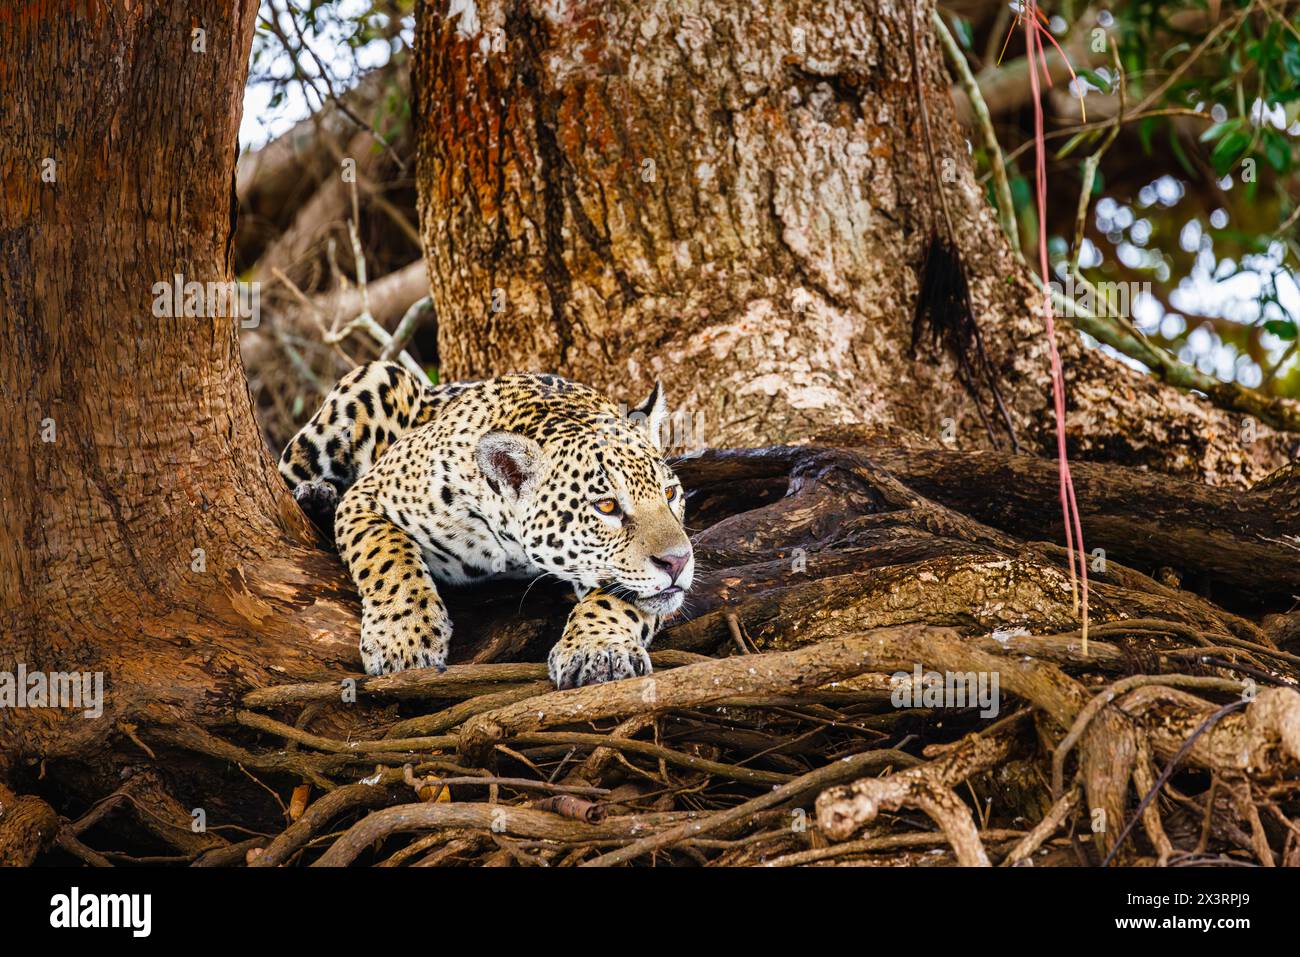 A jaguar (panthera onca) resting in tree roots seen on Cuiaba River by the Parque Estadual Encontro das Águas, north Pantanal, Mato Grosso, Brazil Stock Photo